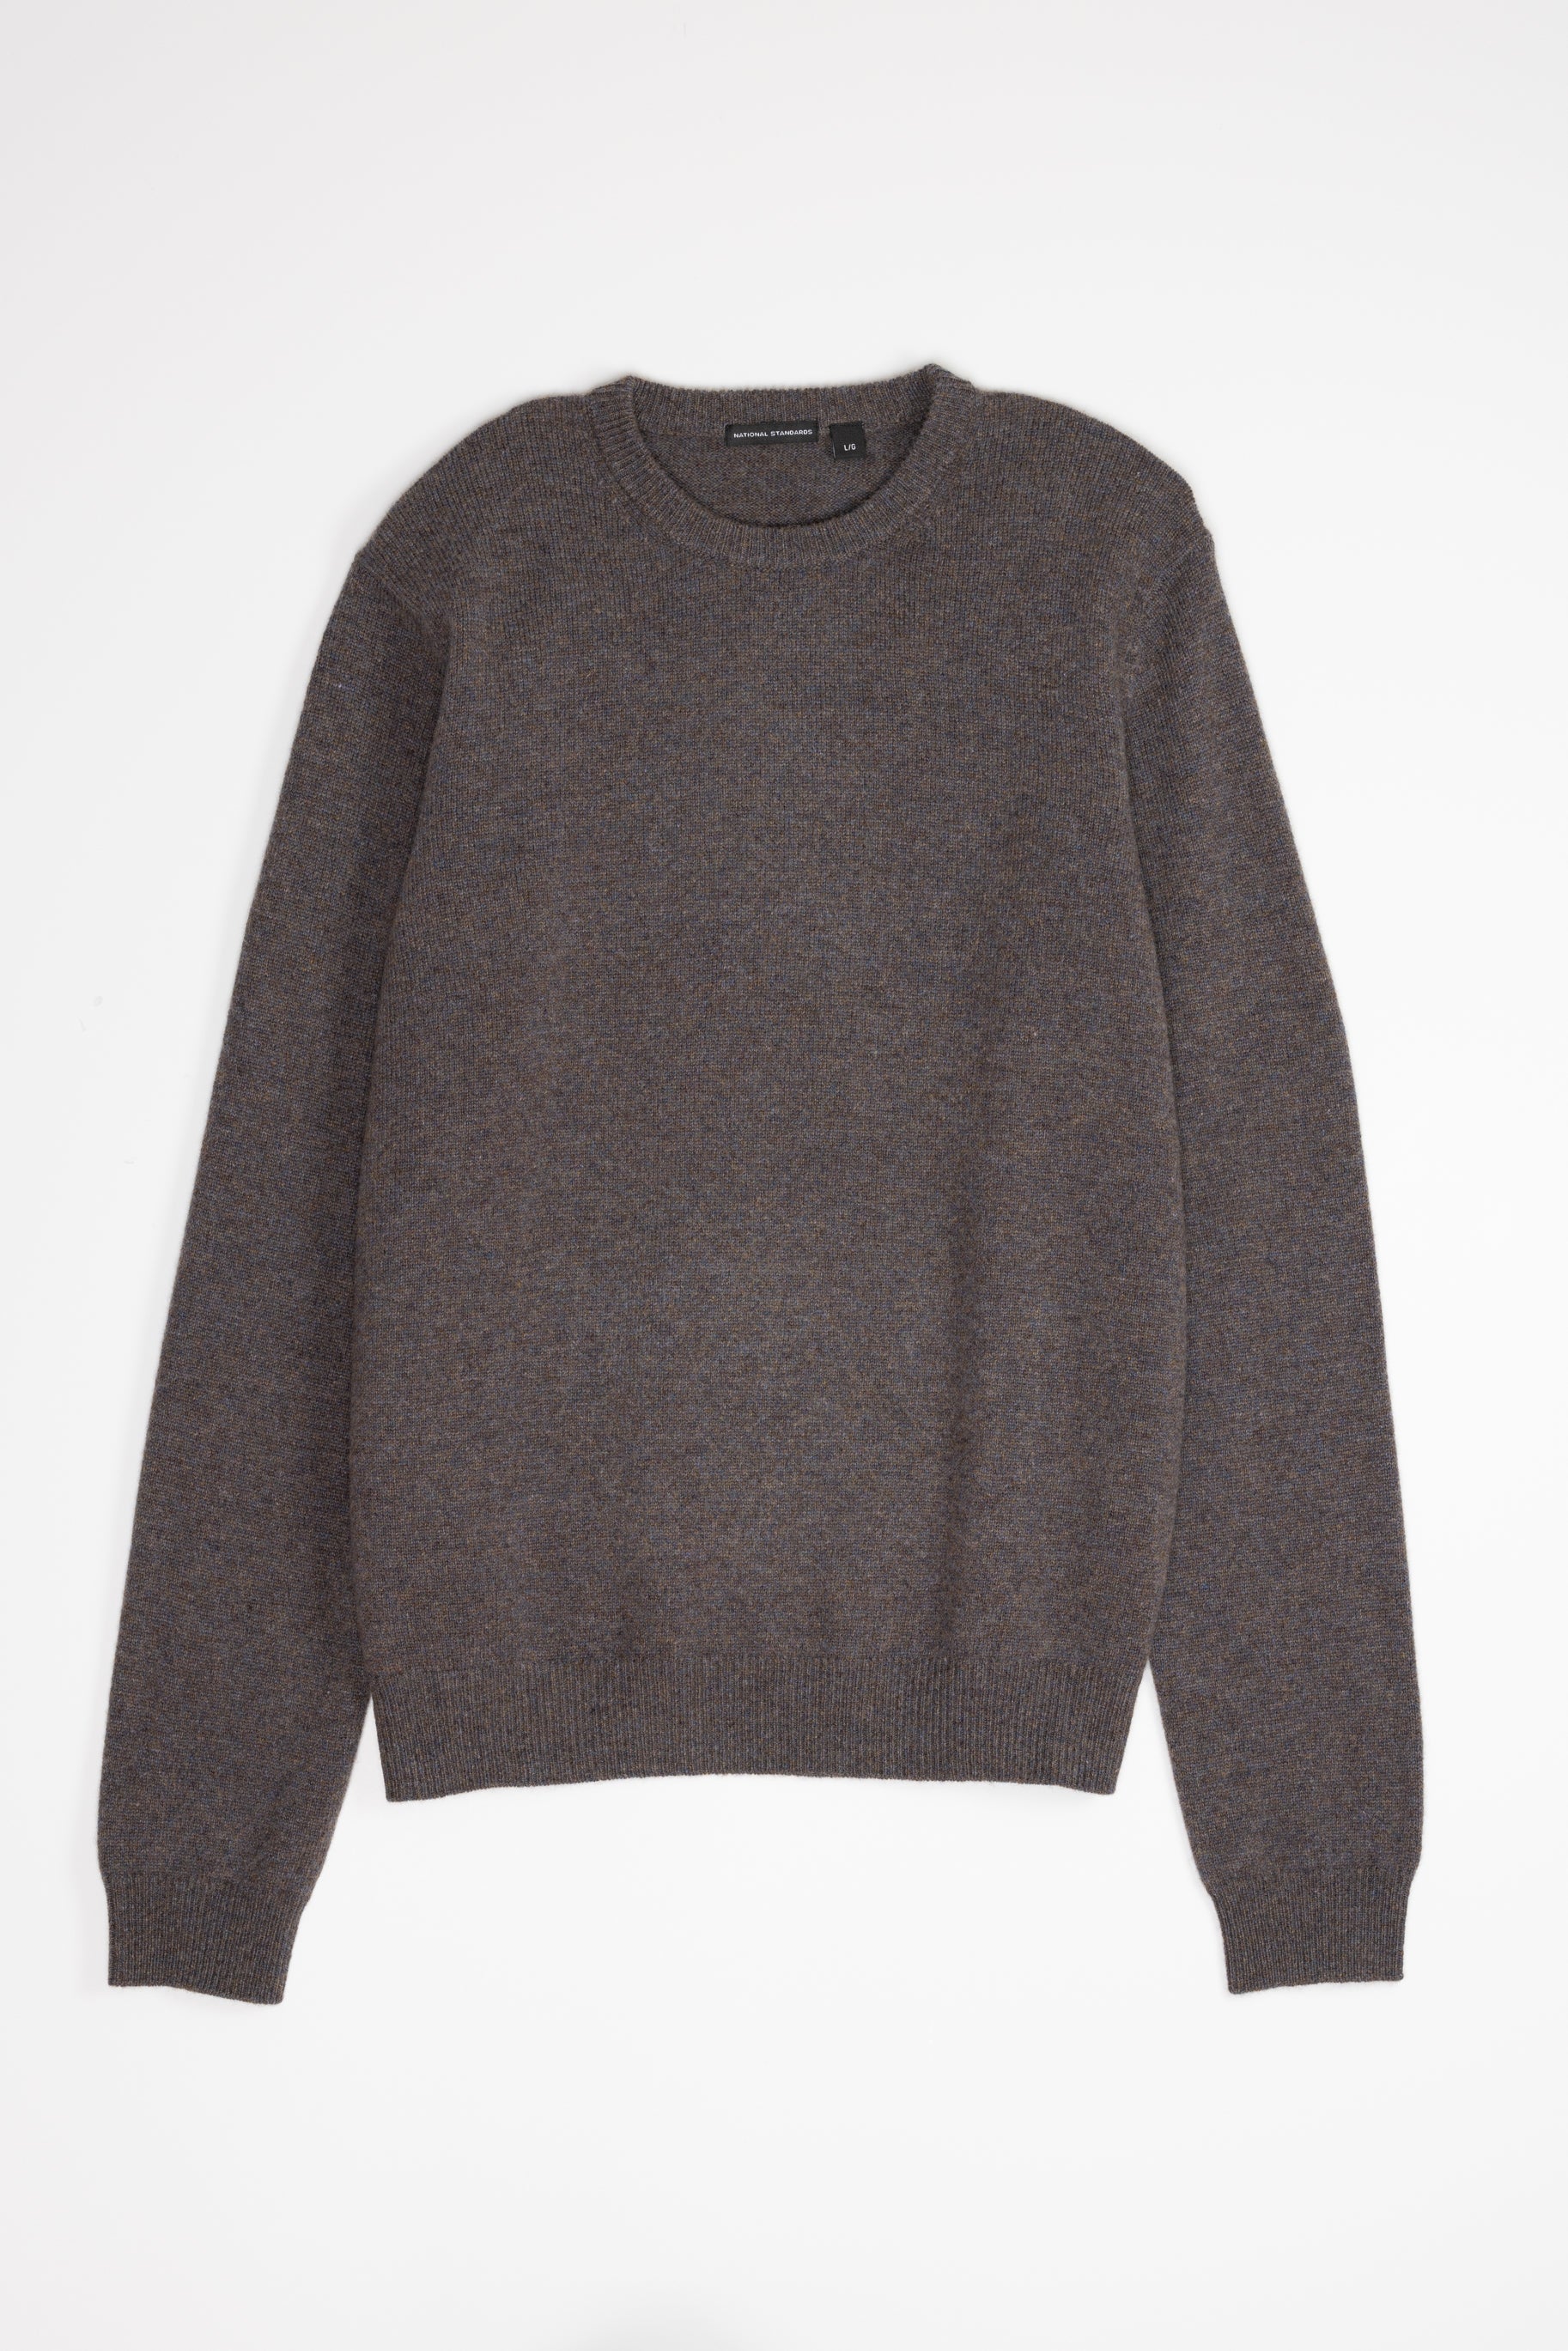 NS3018-20 New Wool Crew Neck in Melange Fossil 1